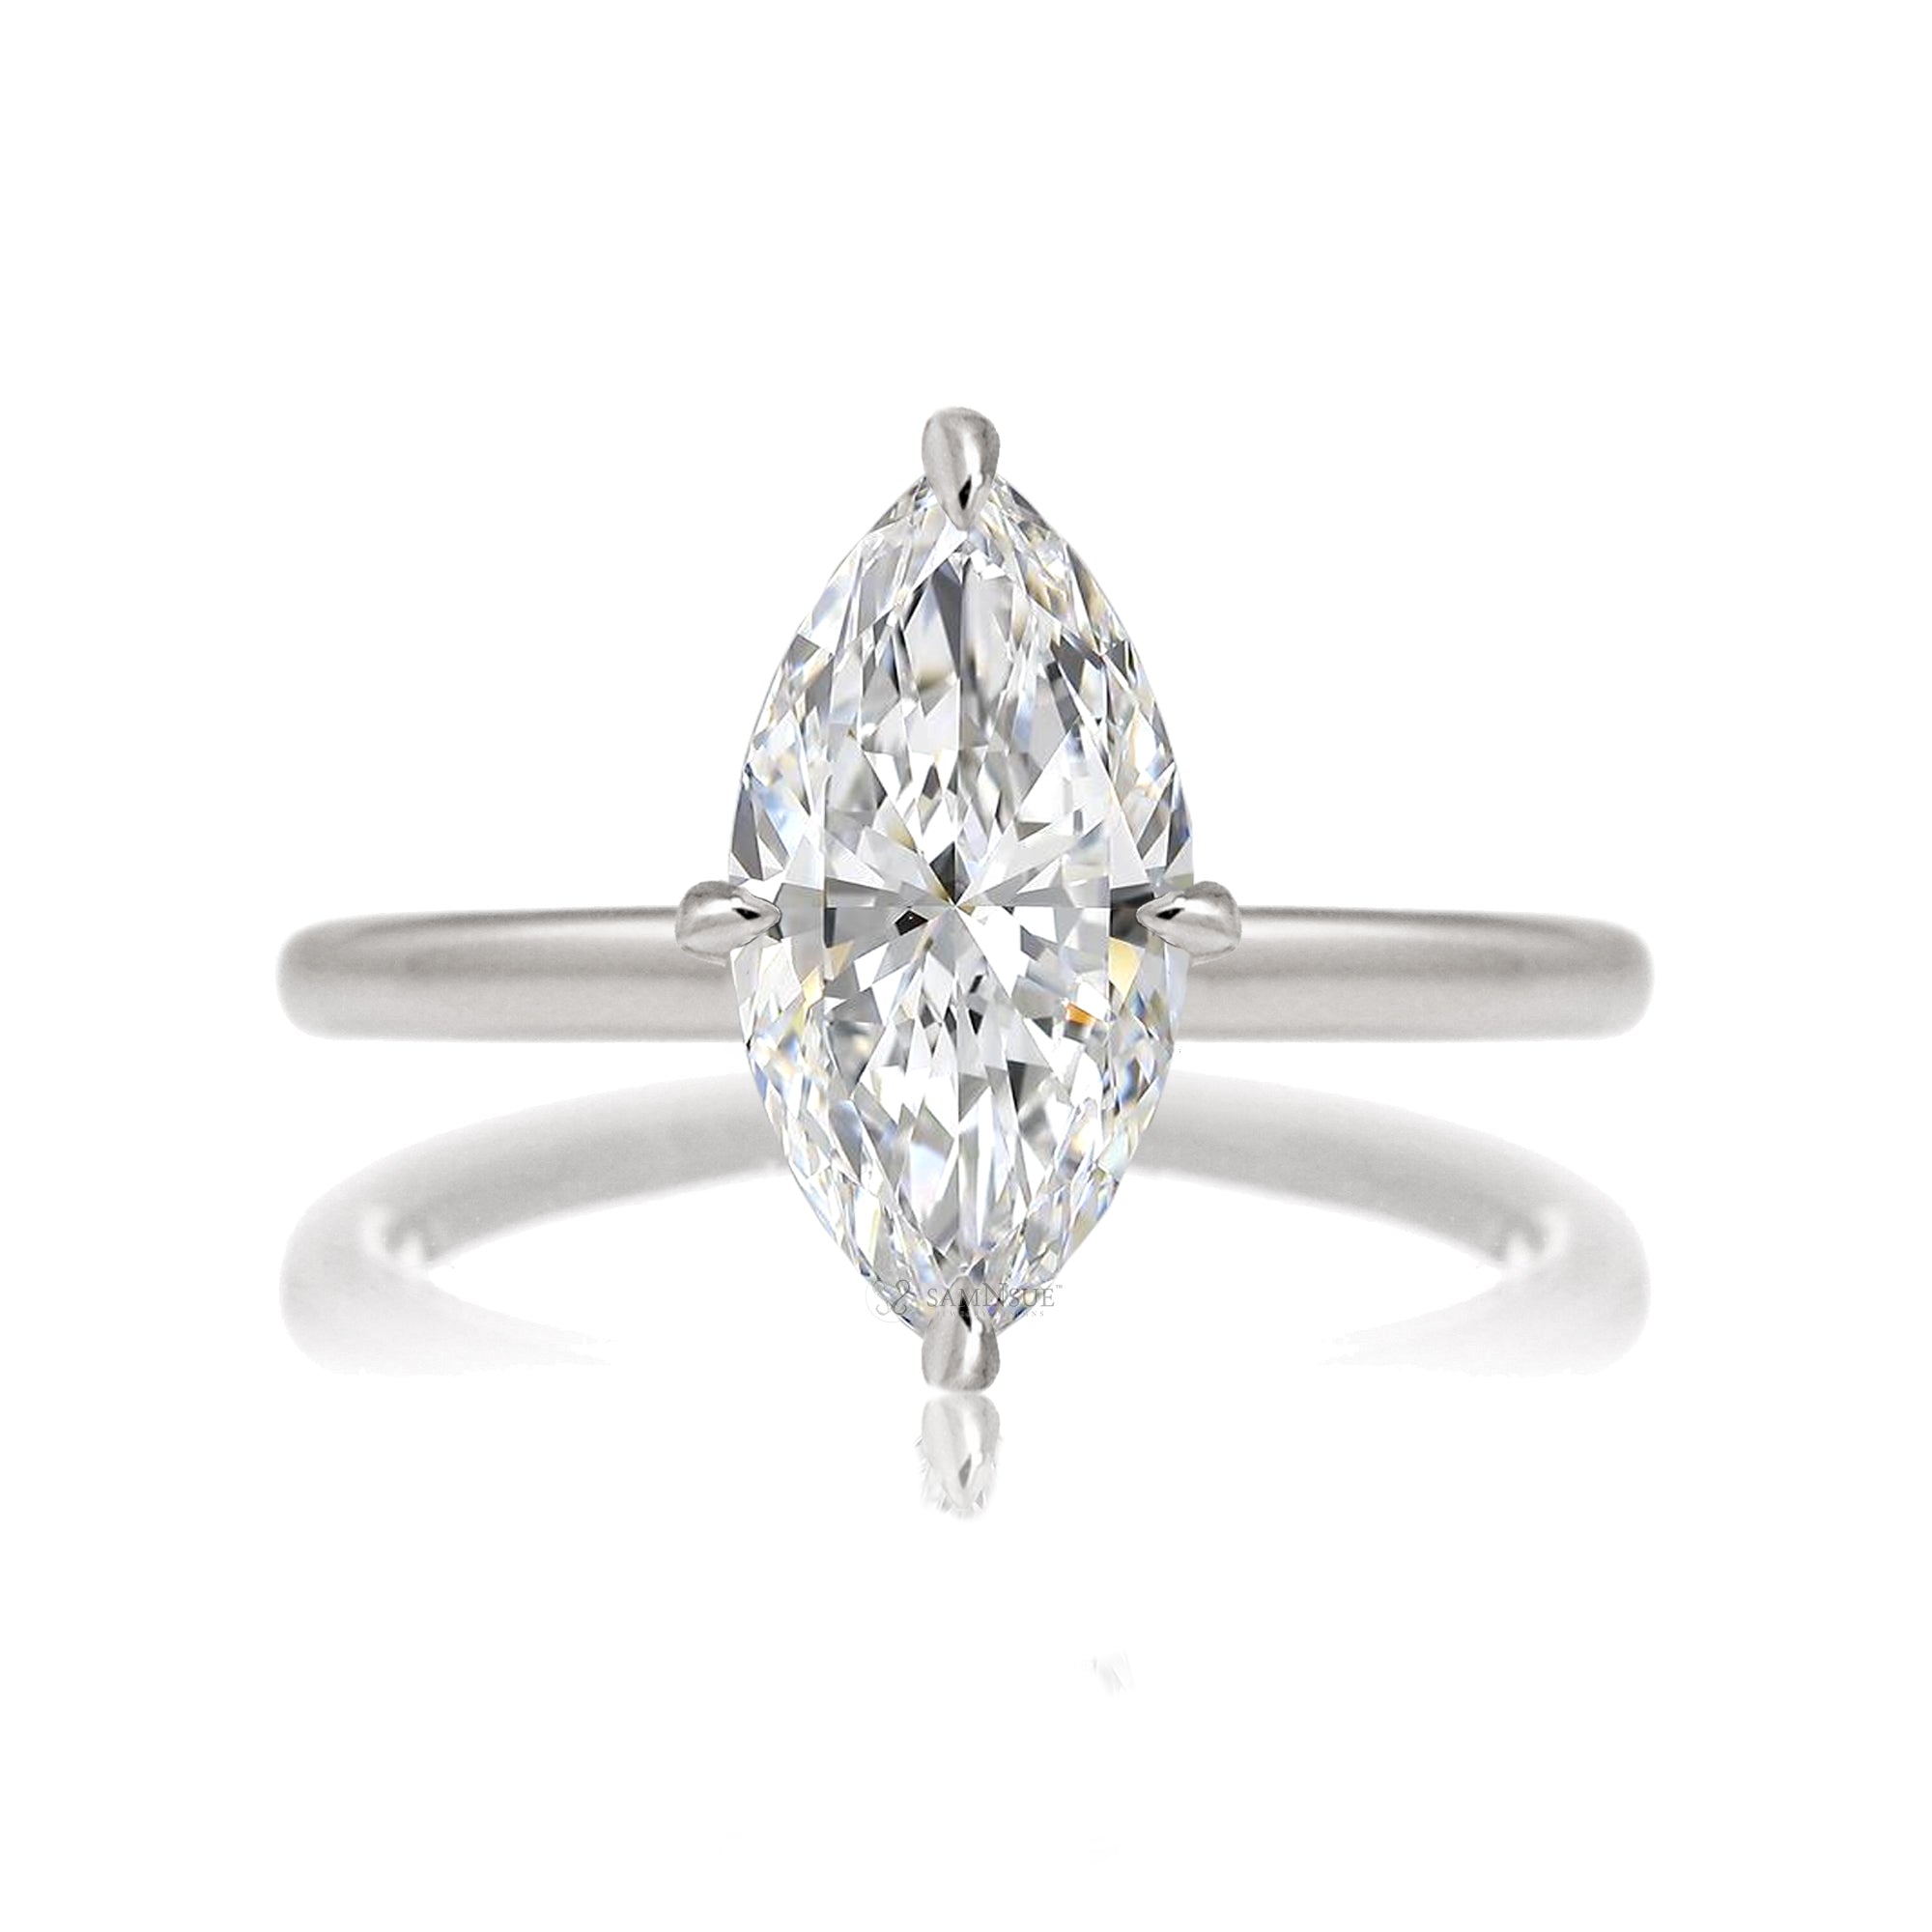 Marquise cut solitaire diamond engagement ring with a hidden halo and solid polished band in white gold